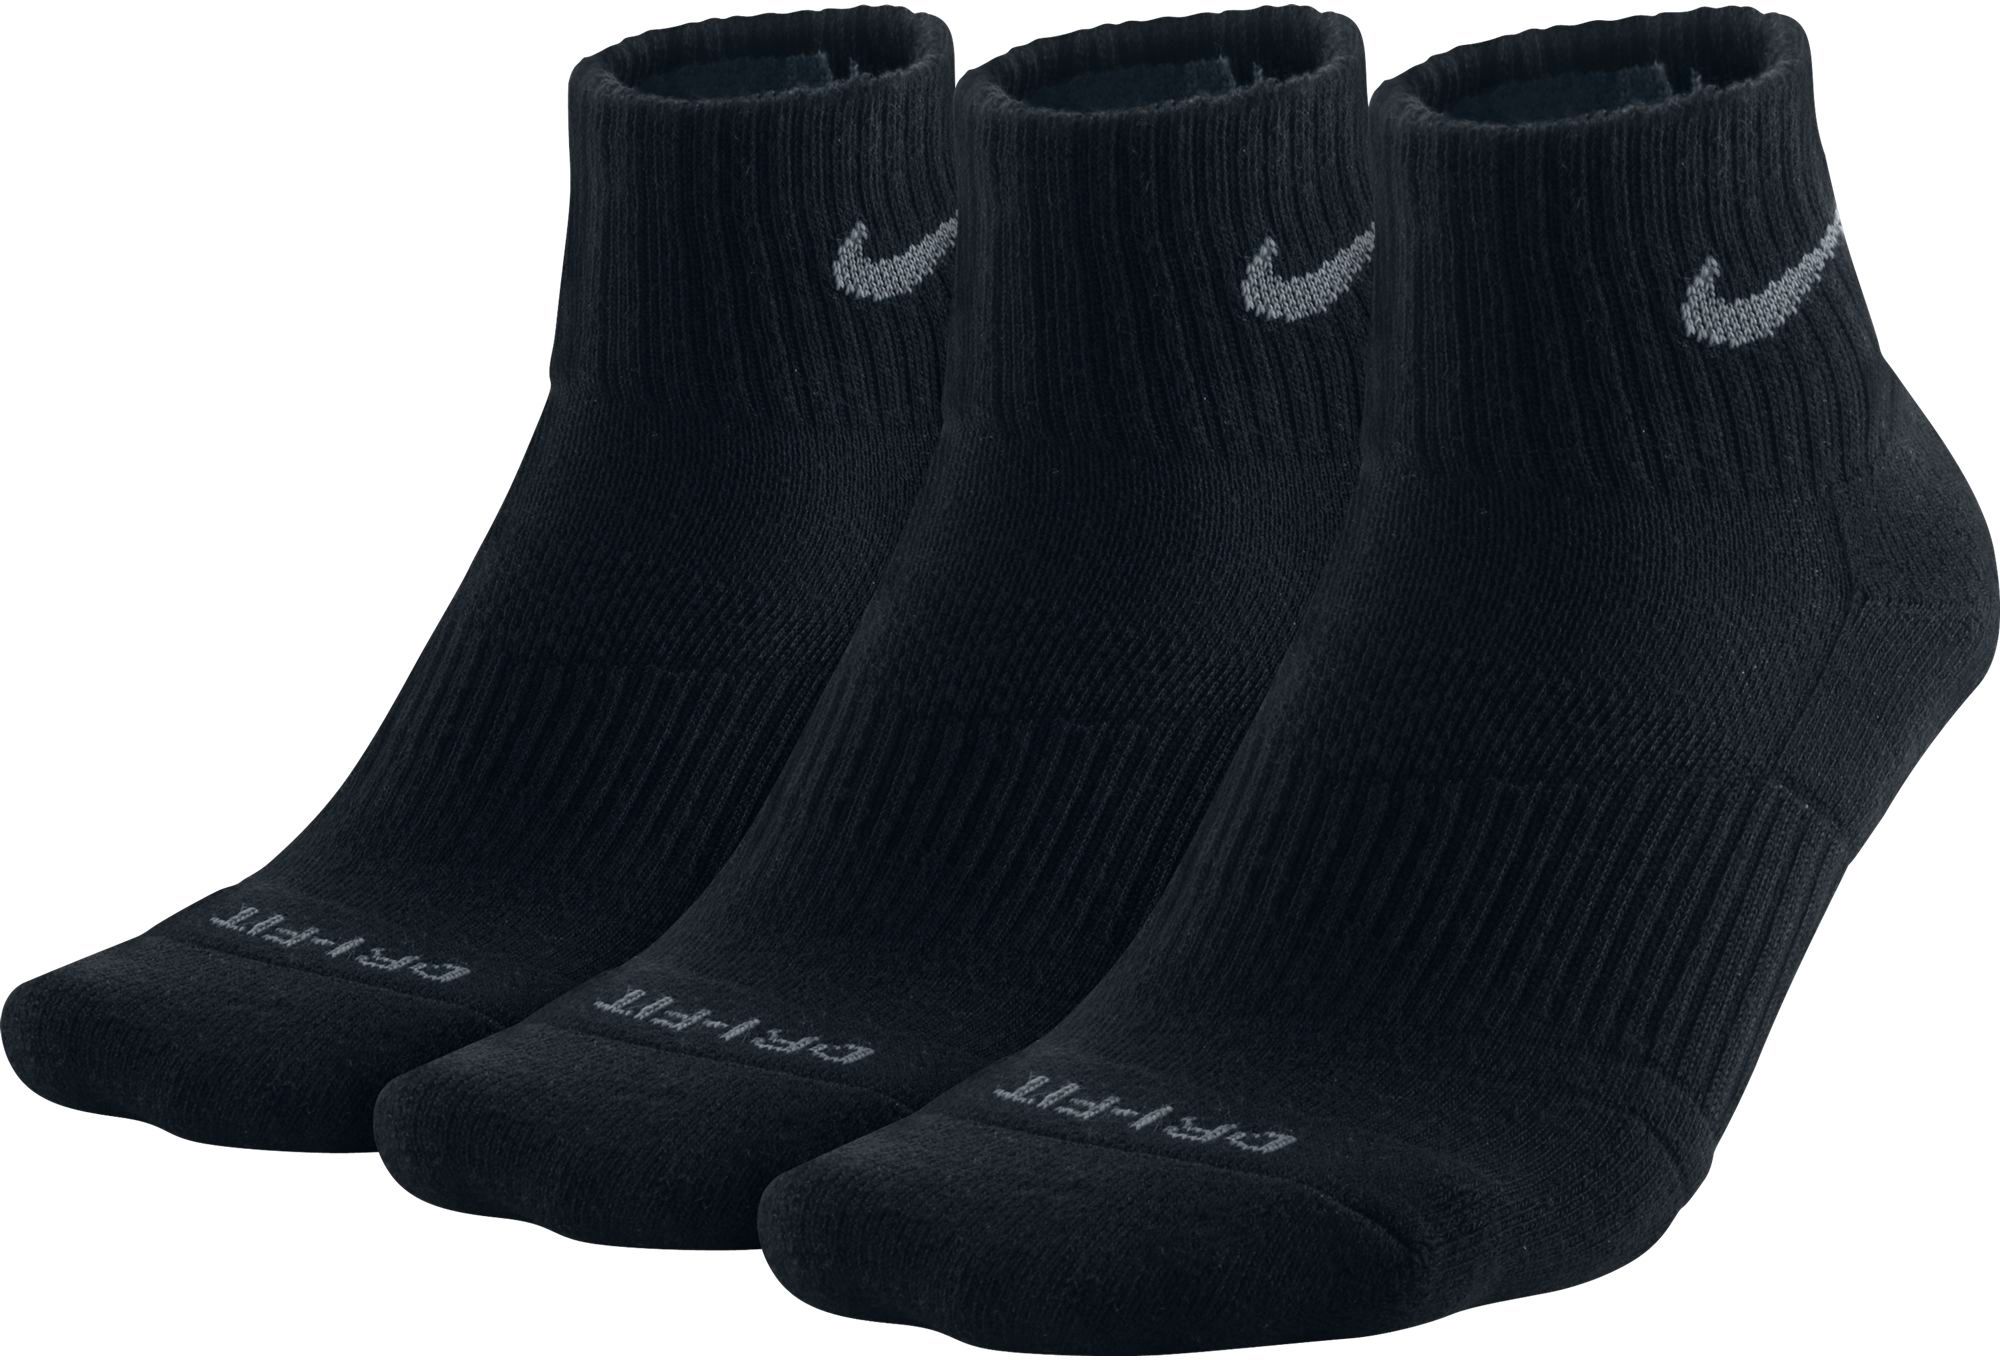 nike socks with left and right